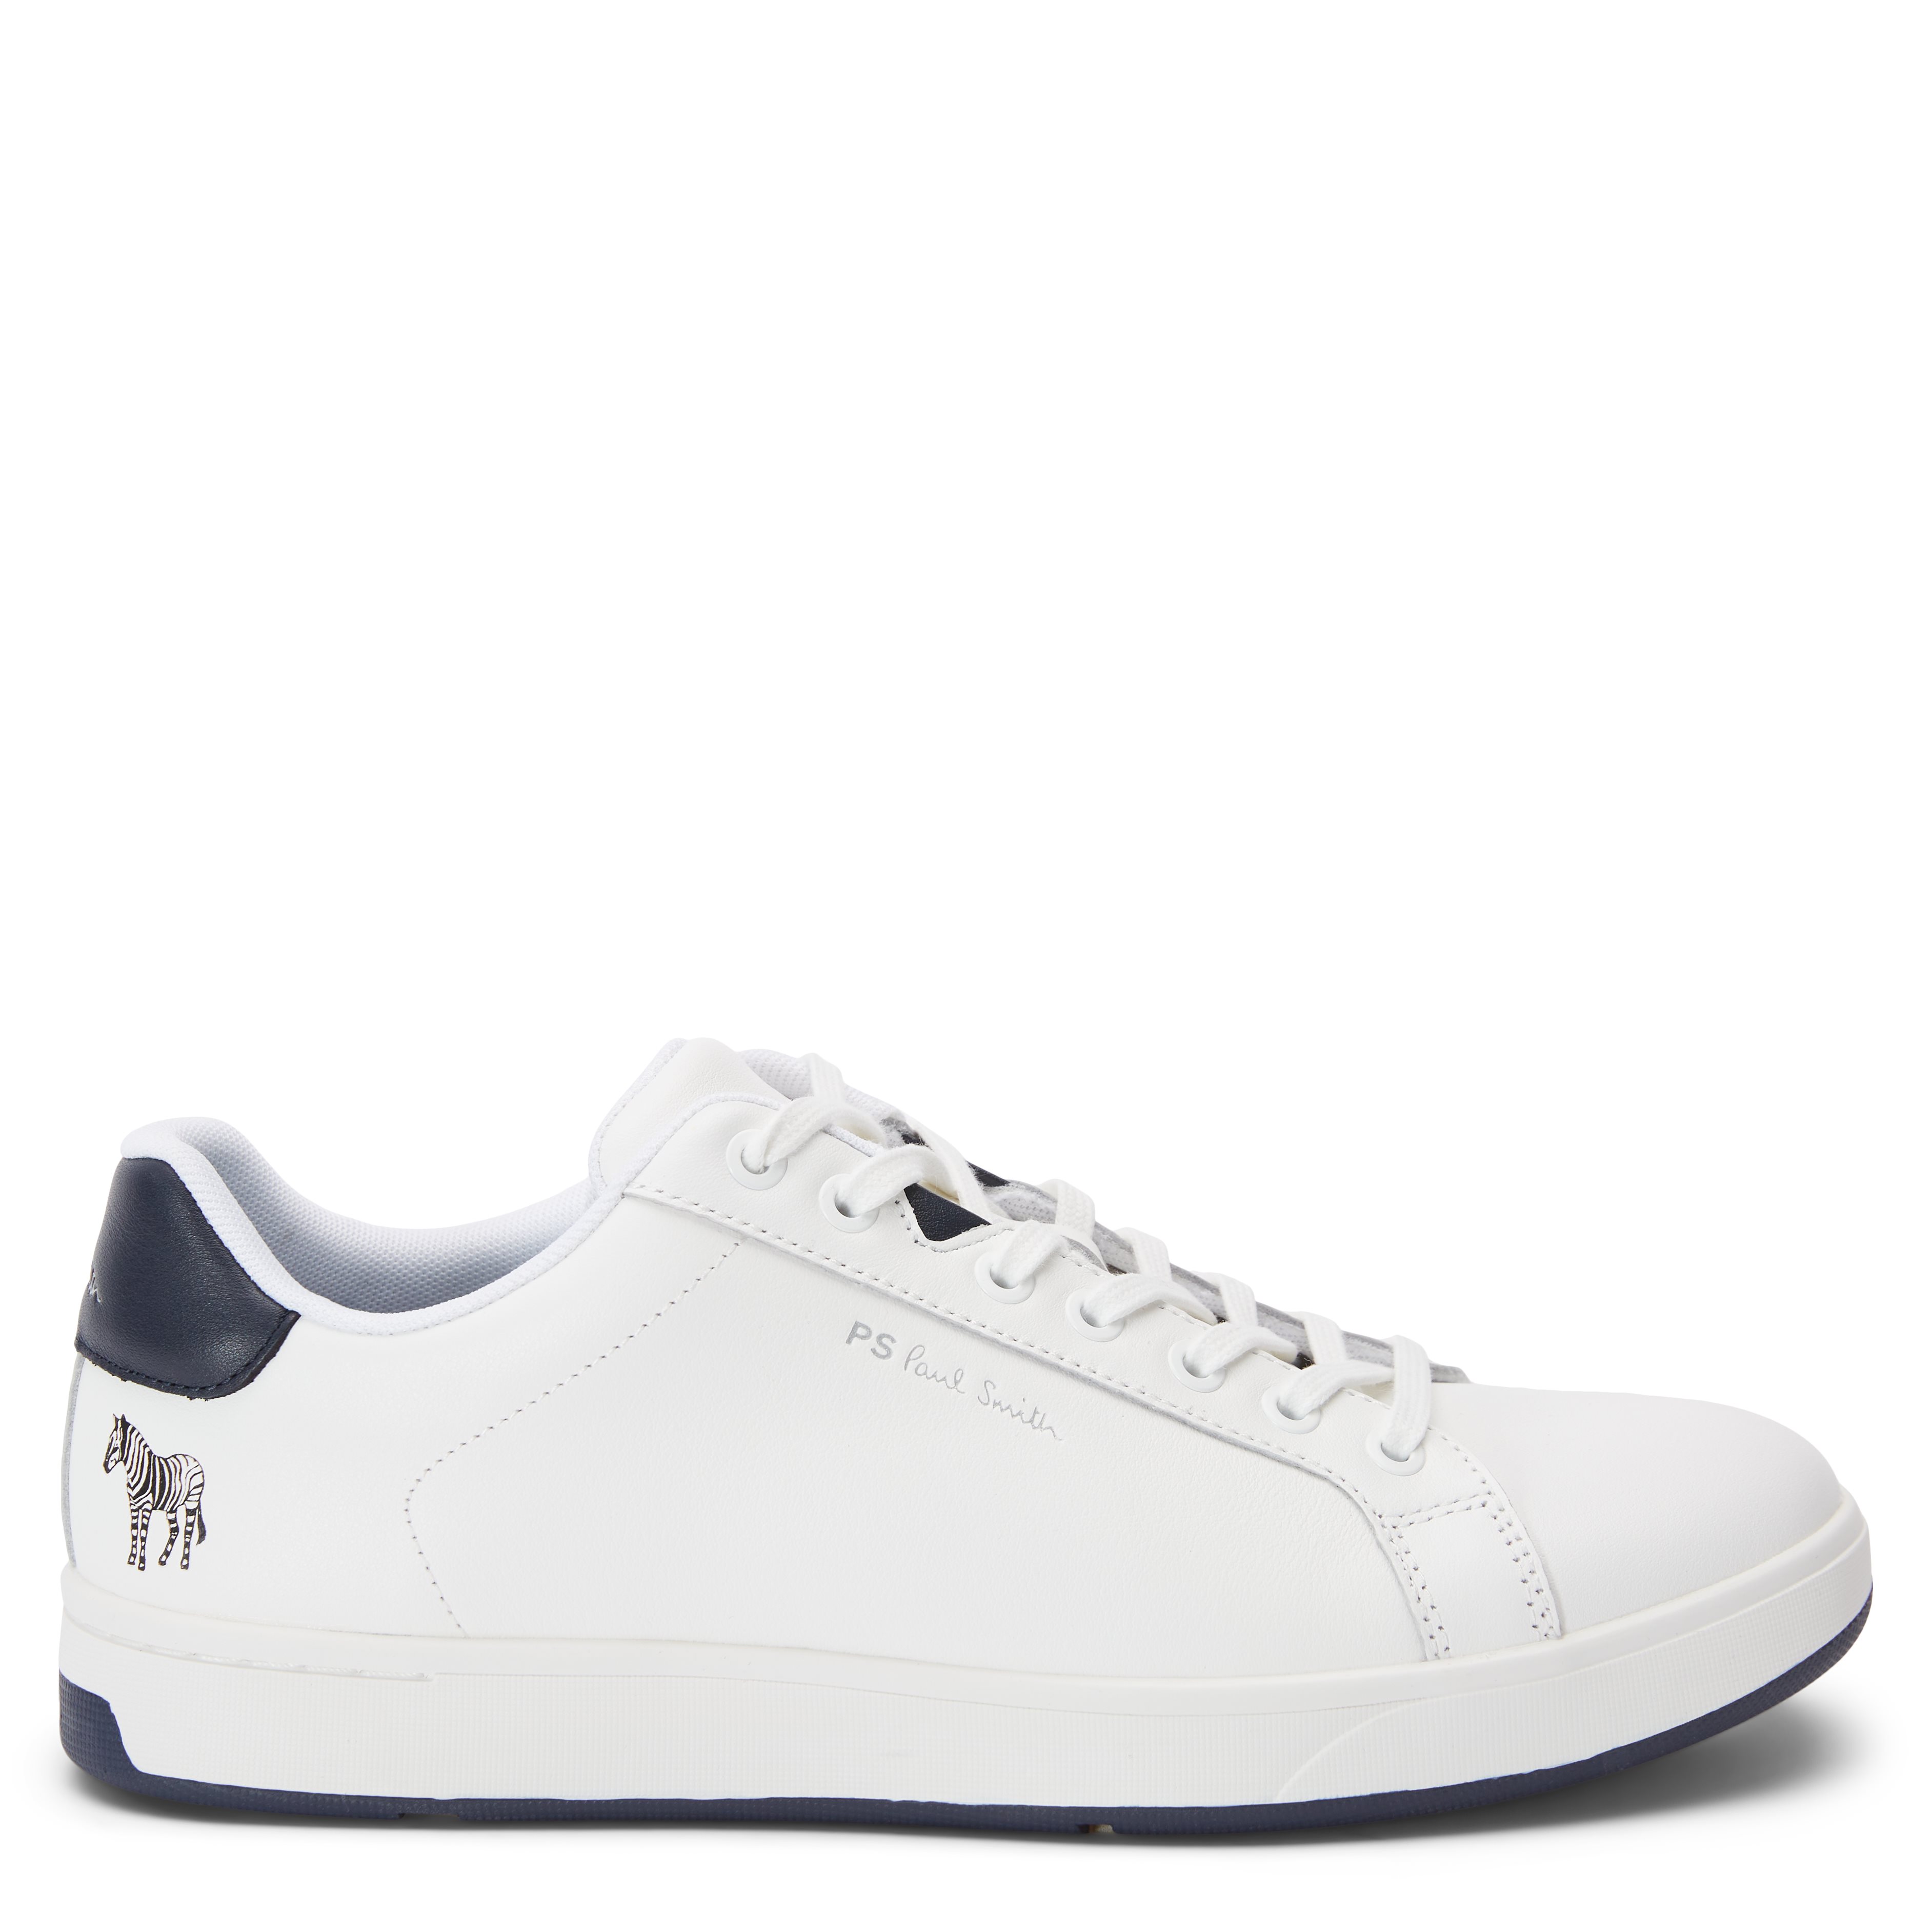 Paul Smith Shoes Shoes ALY01 MCAS SPOILER White